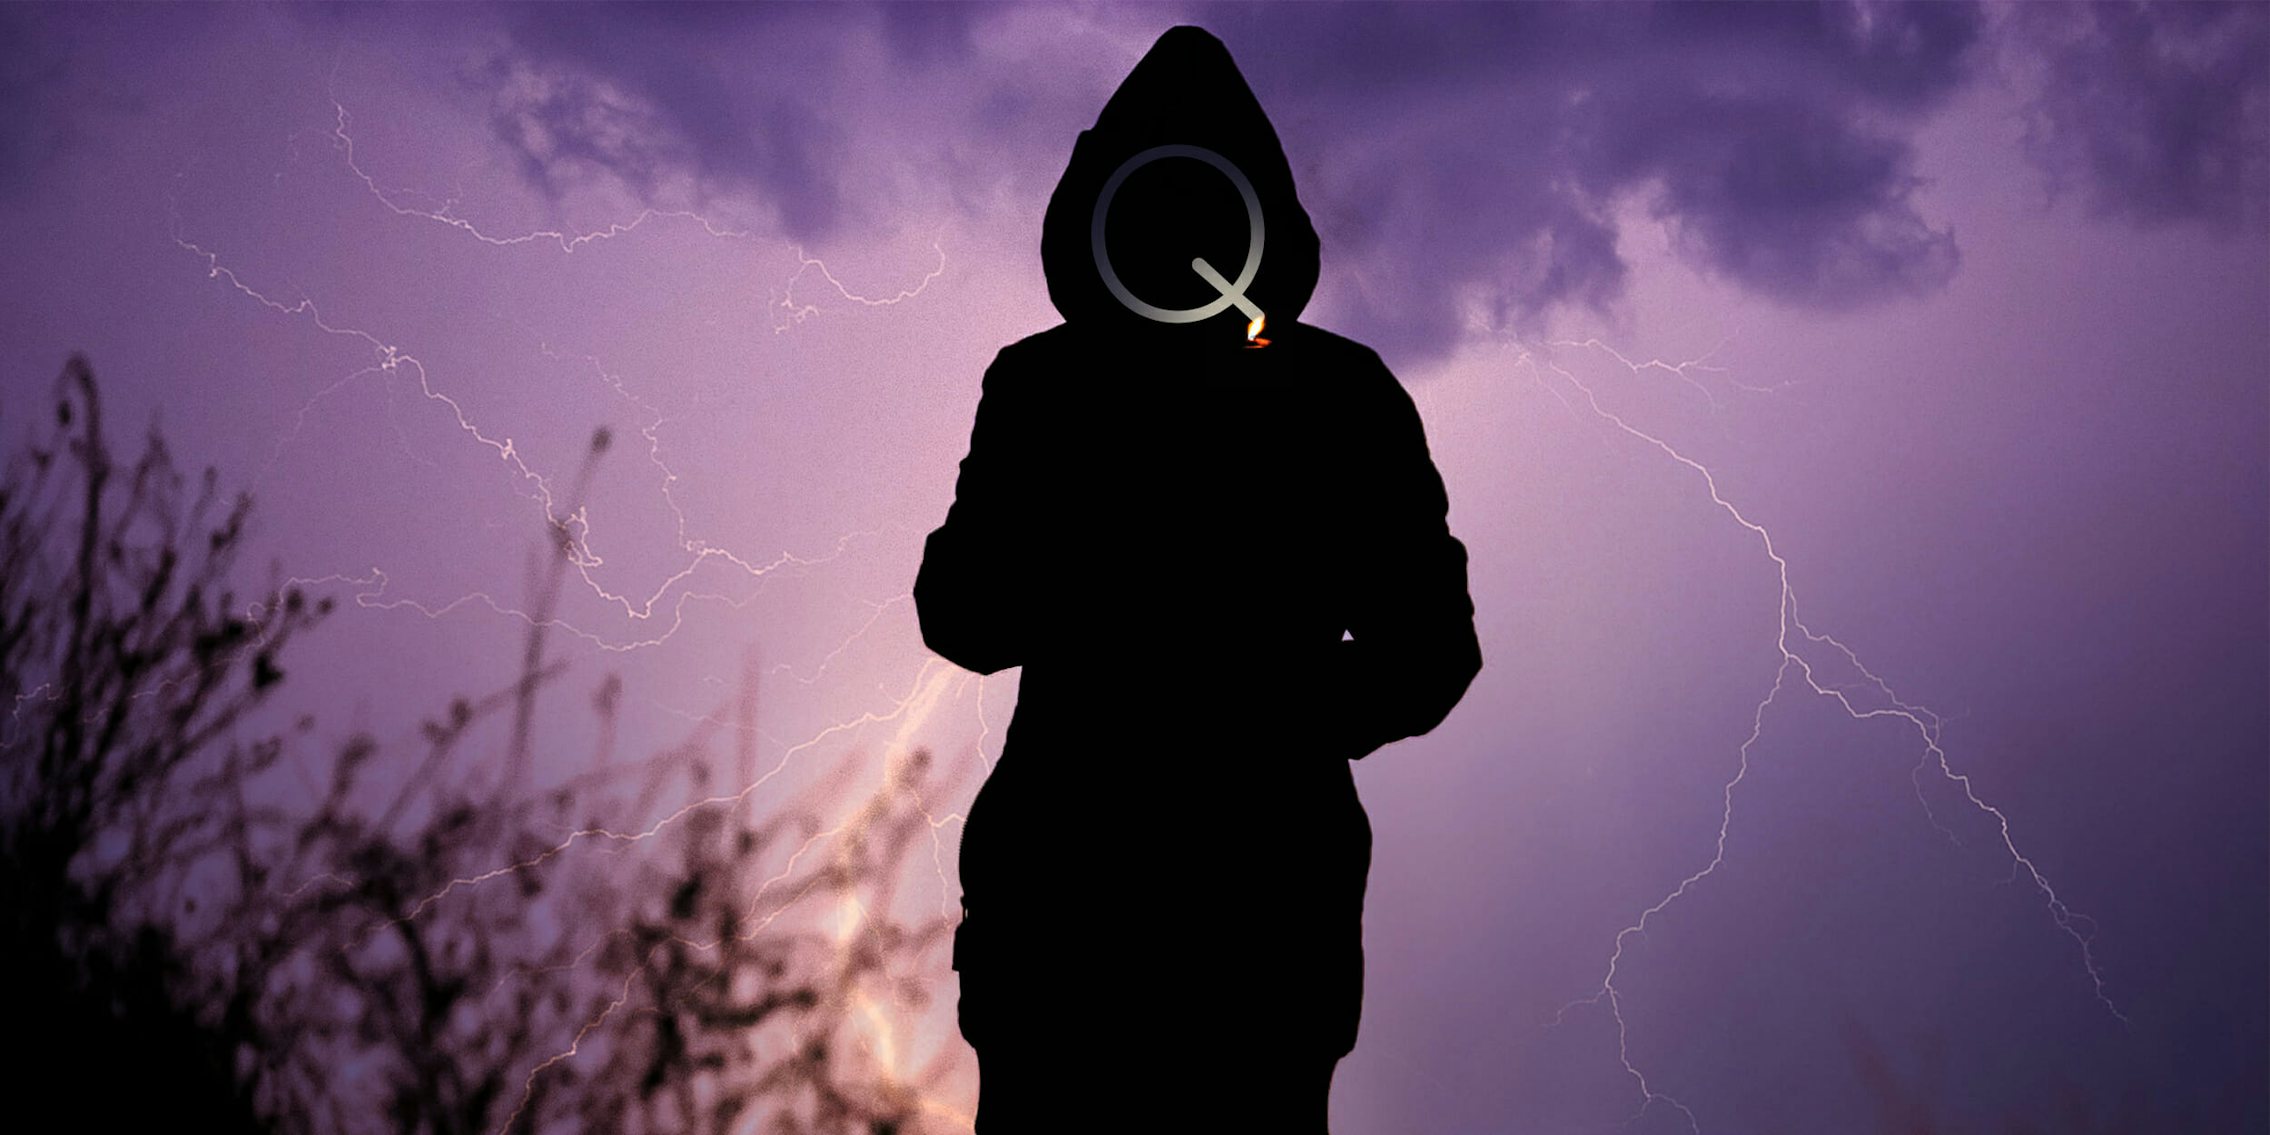 Silhouette of person lighting cigarette in front of lightning storm, face made of the letter Q